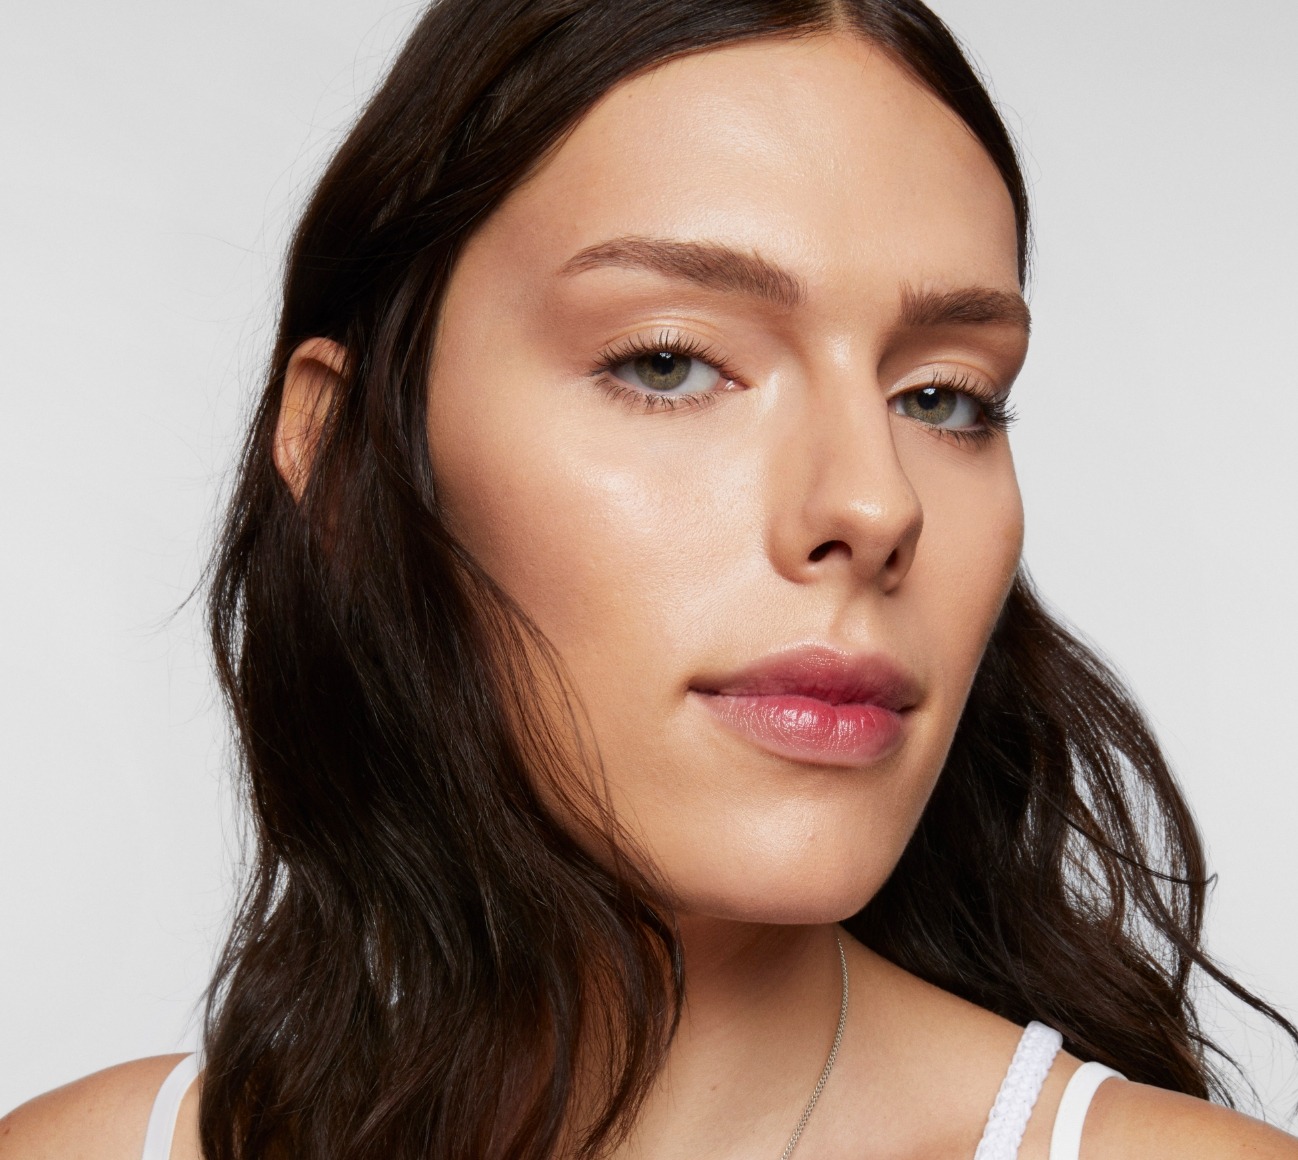 Model wears a full face of Milk Makeup Products against a white background